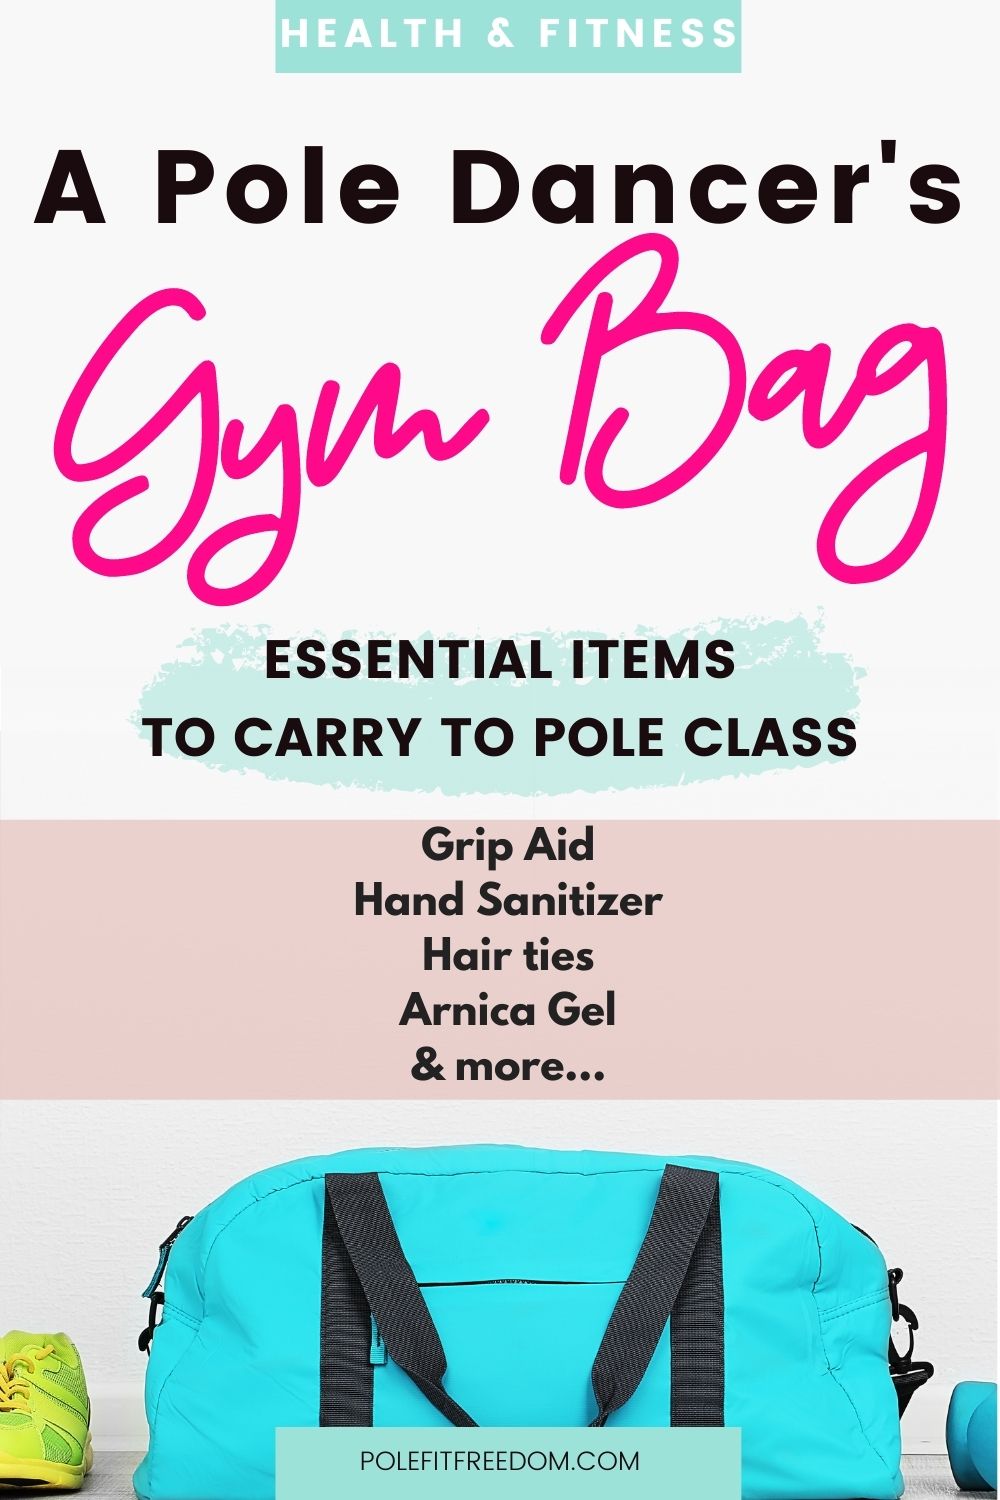 A Pole Dancer's Gym Bag Essentials - essential items to carry to pole class (Grip aid, Hand sanitizer, hair ties, Arnica Gel & more)